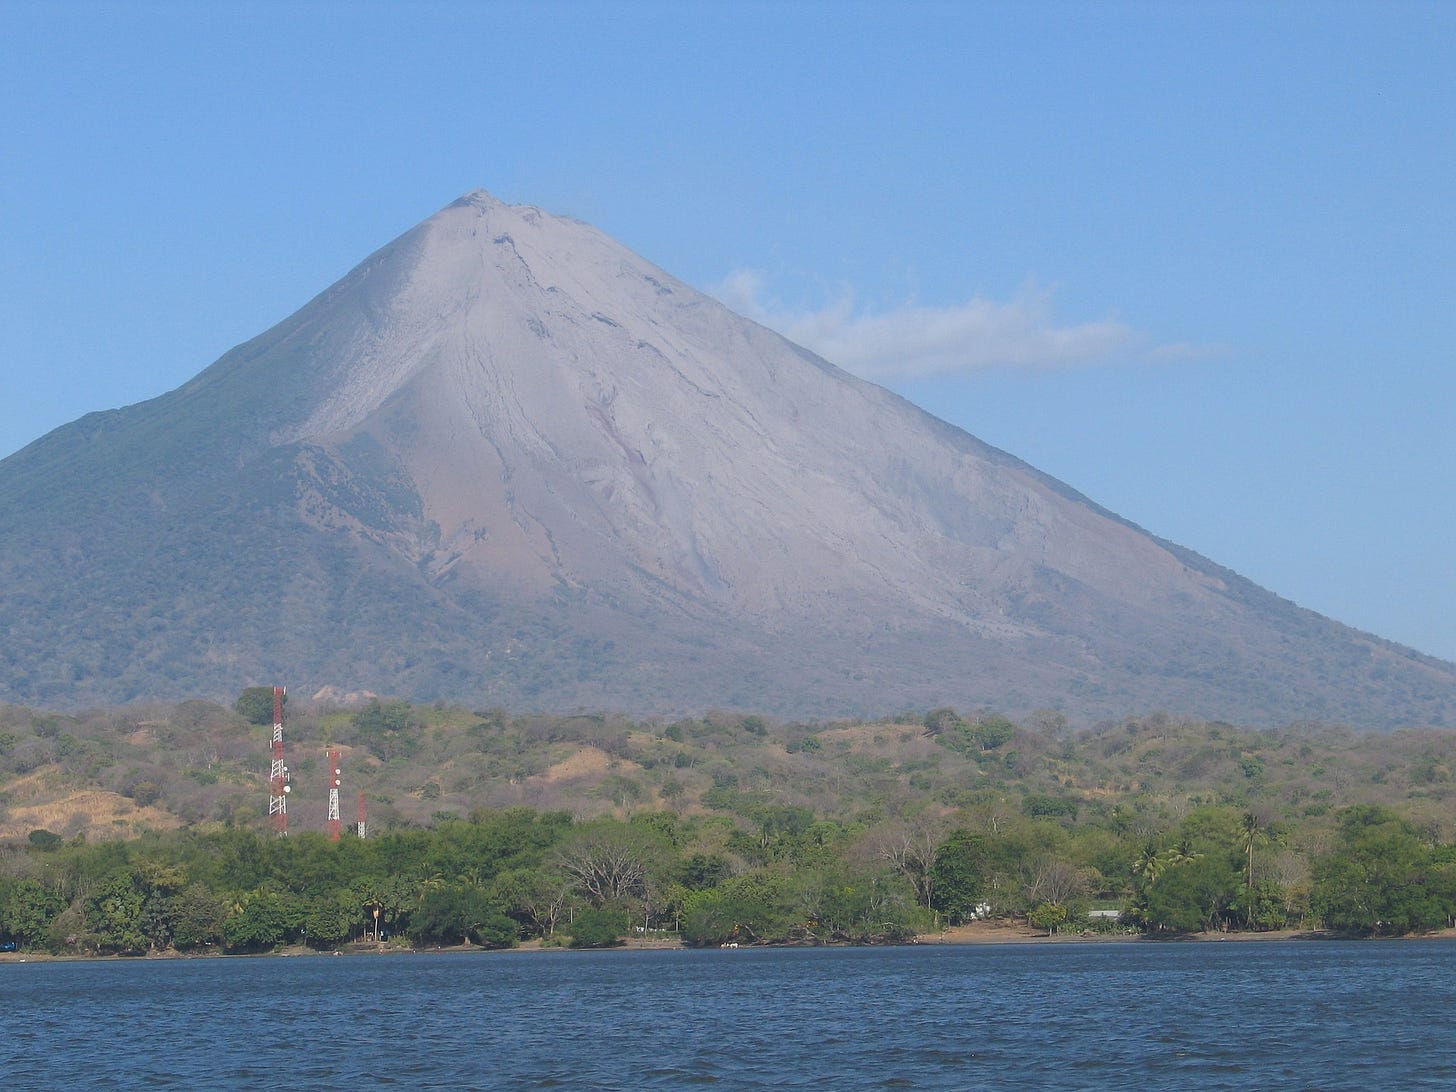 Conception volcano in Nicaragua